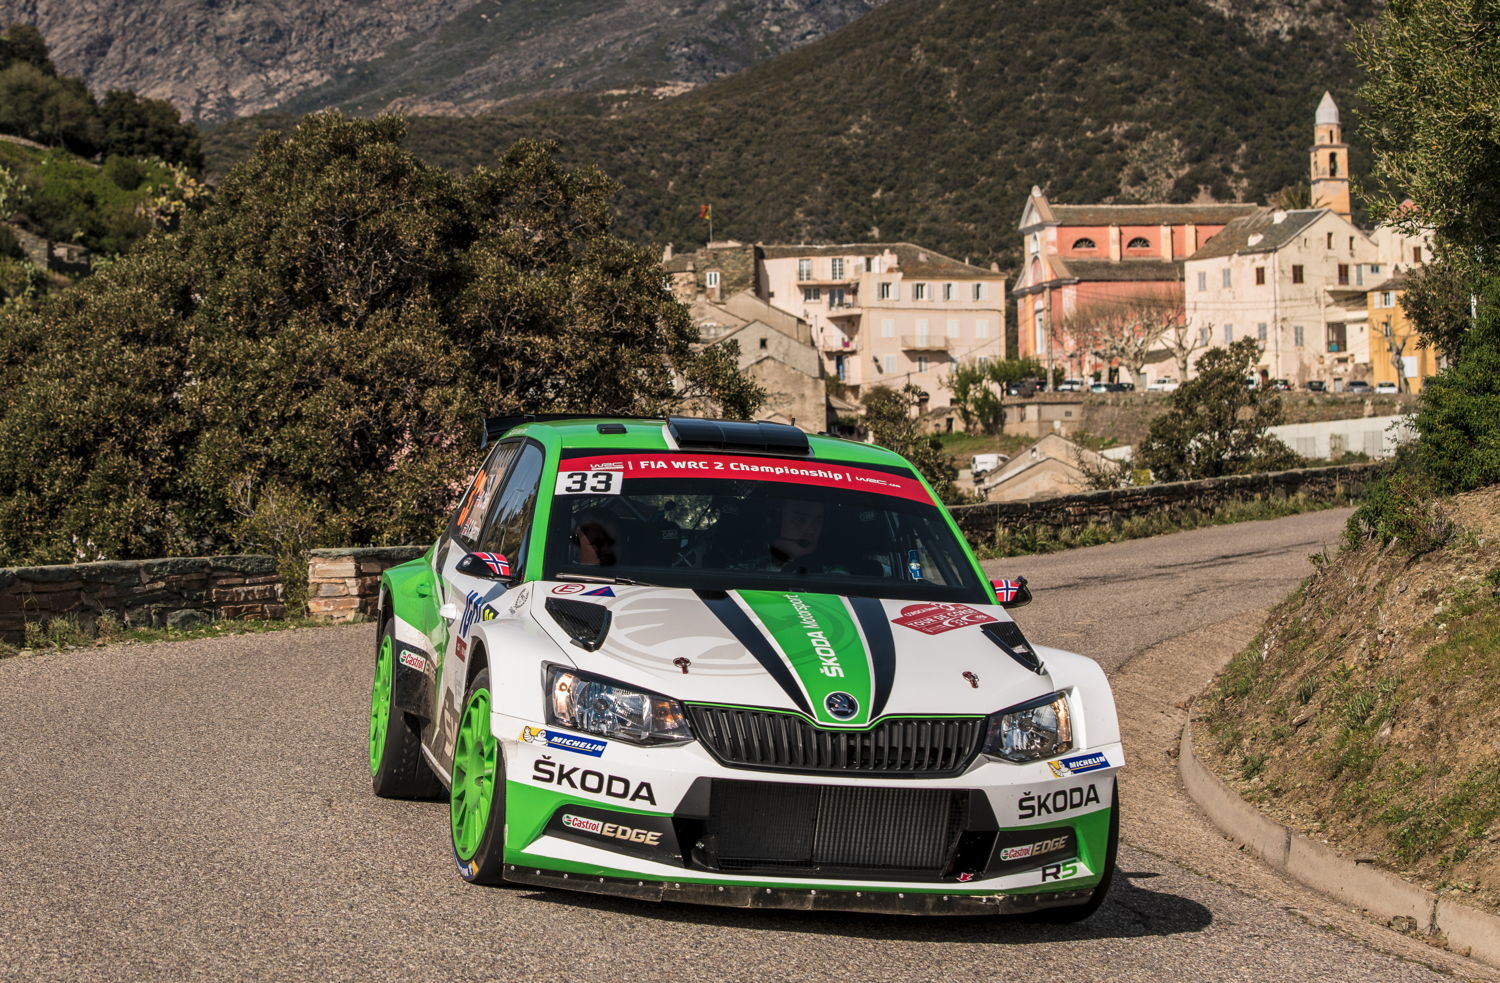 After leg two of the Rally France/Tour de Corse 2018, Ole Christian Veiby and Stig Rune Skjaermœn (NOR/NOR) are third in the provisional standings of the WRC 2 category